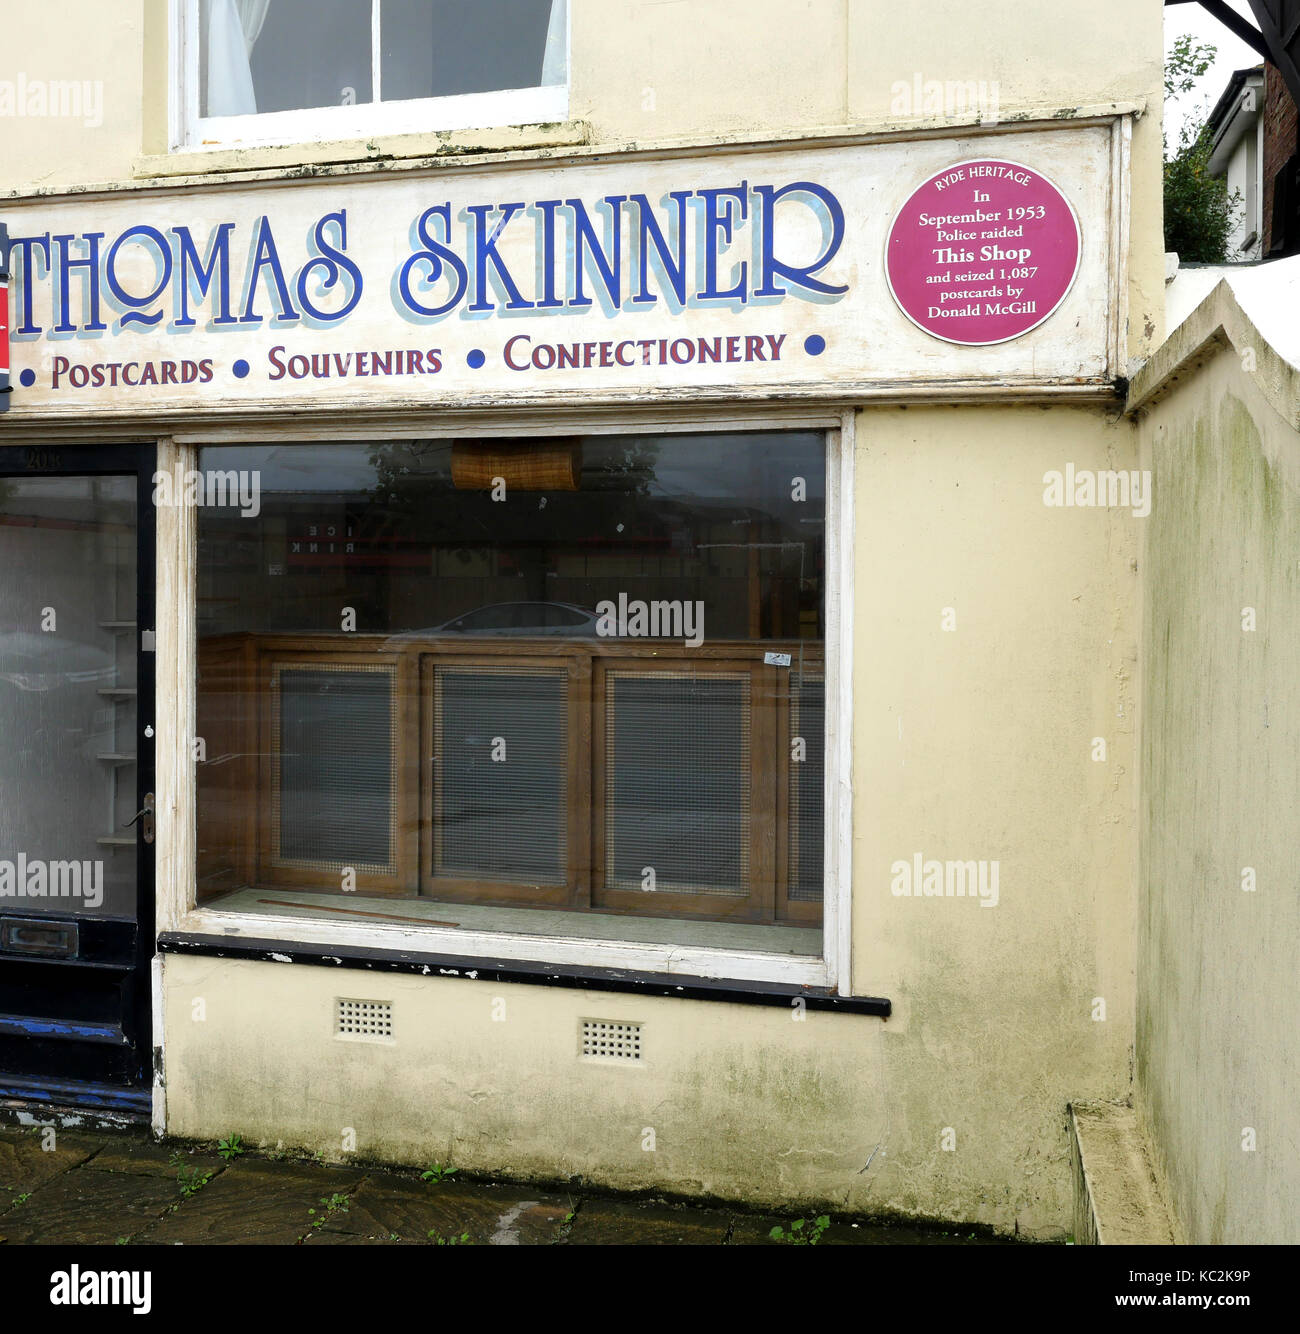 Disused shop once owned by Thomas Skinner who was raided by the police in 1953 for selling cheeky seaside postcards by Donald McGill, Esplanade, Ryde. Stock Photo